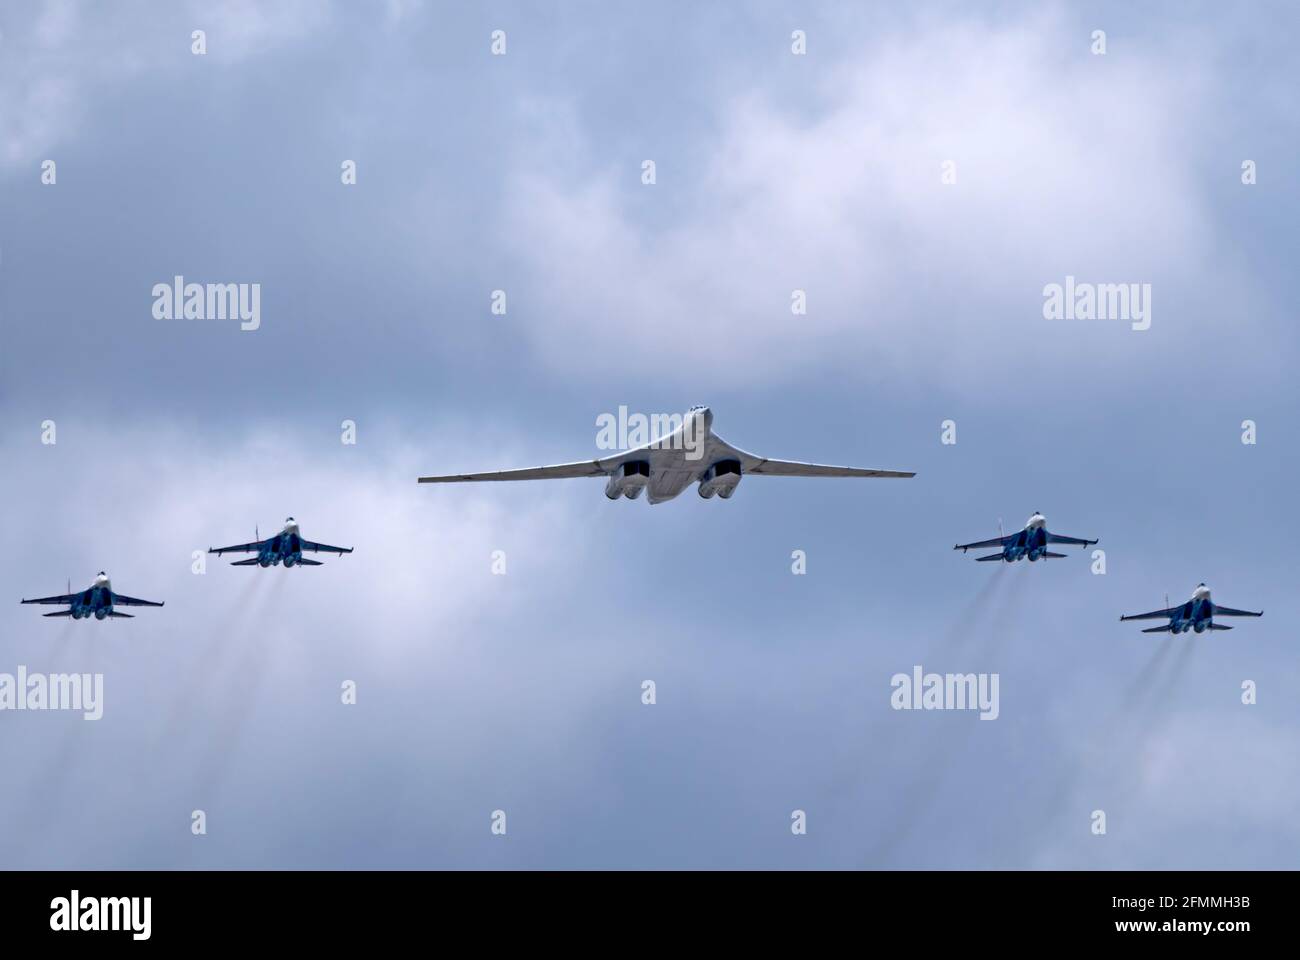 MOSCOW, RUSSIA - MAY 7, 2021: Avia parade in Moscow. su-35 and strategic bomber and missile platform Tu-160 in the sky on parade of Victory in World W Stock Photo